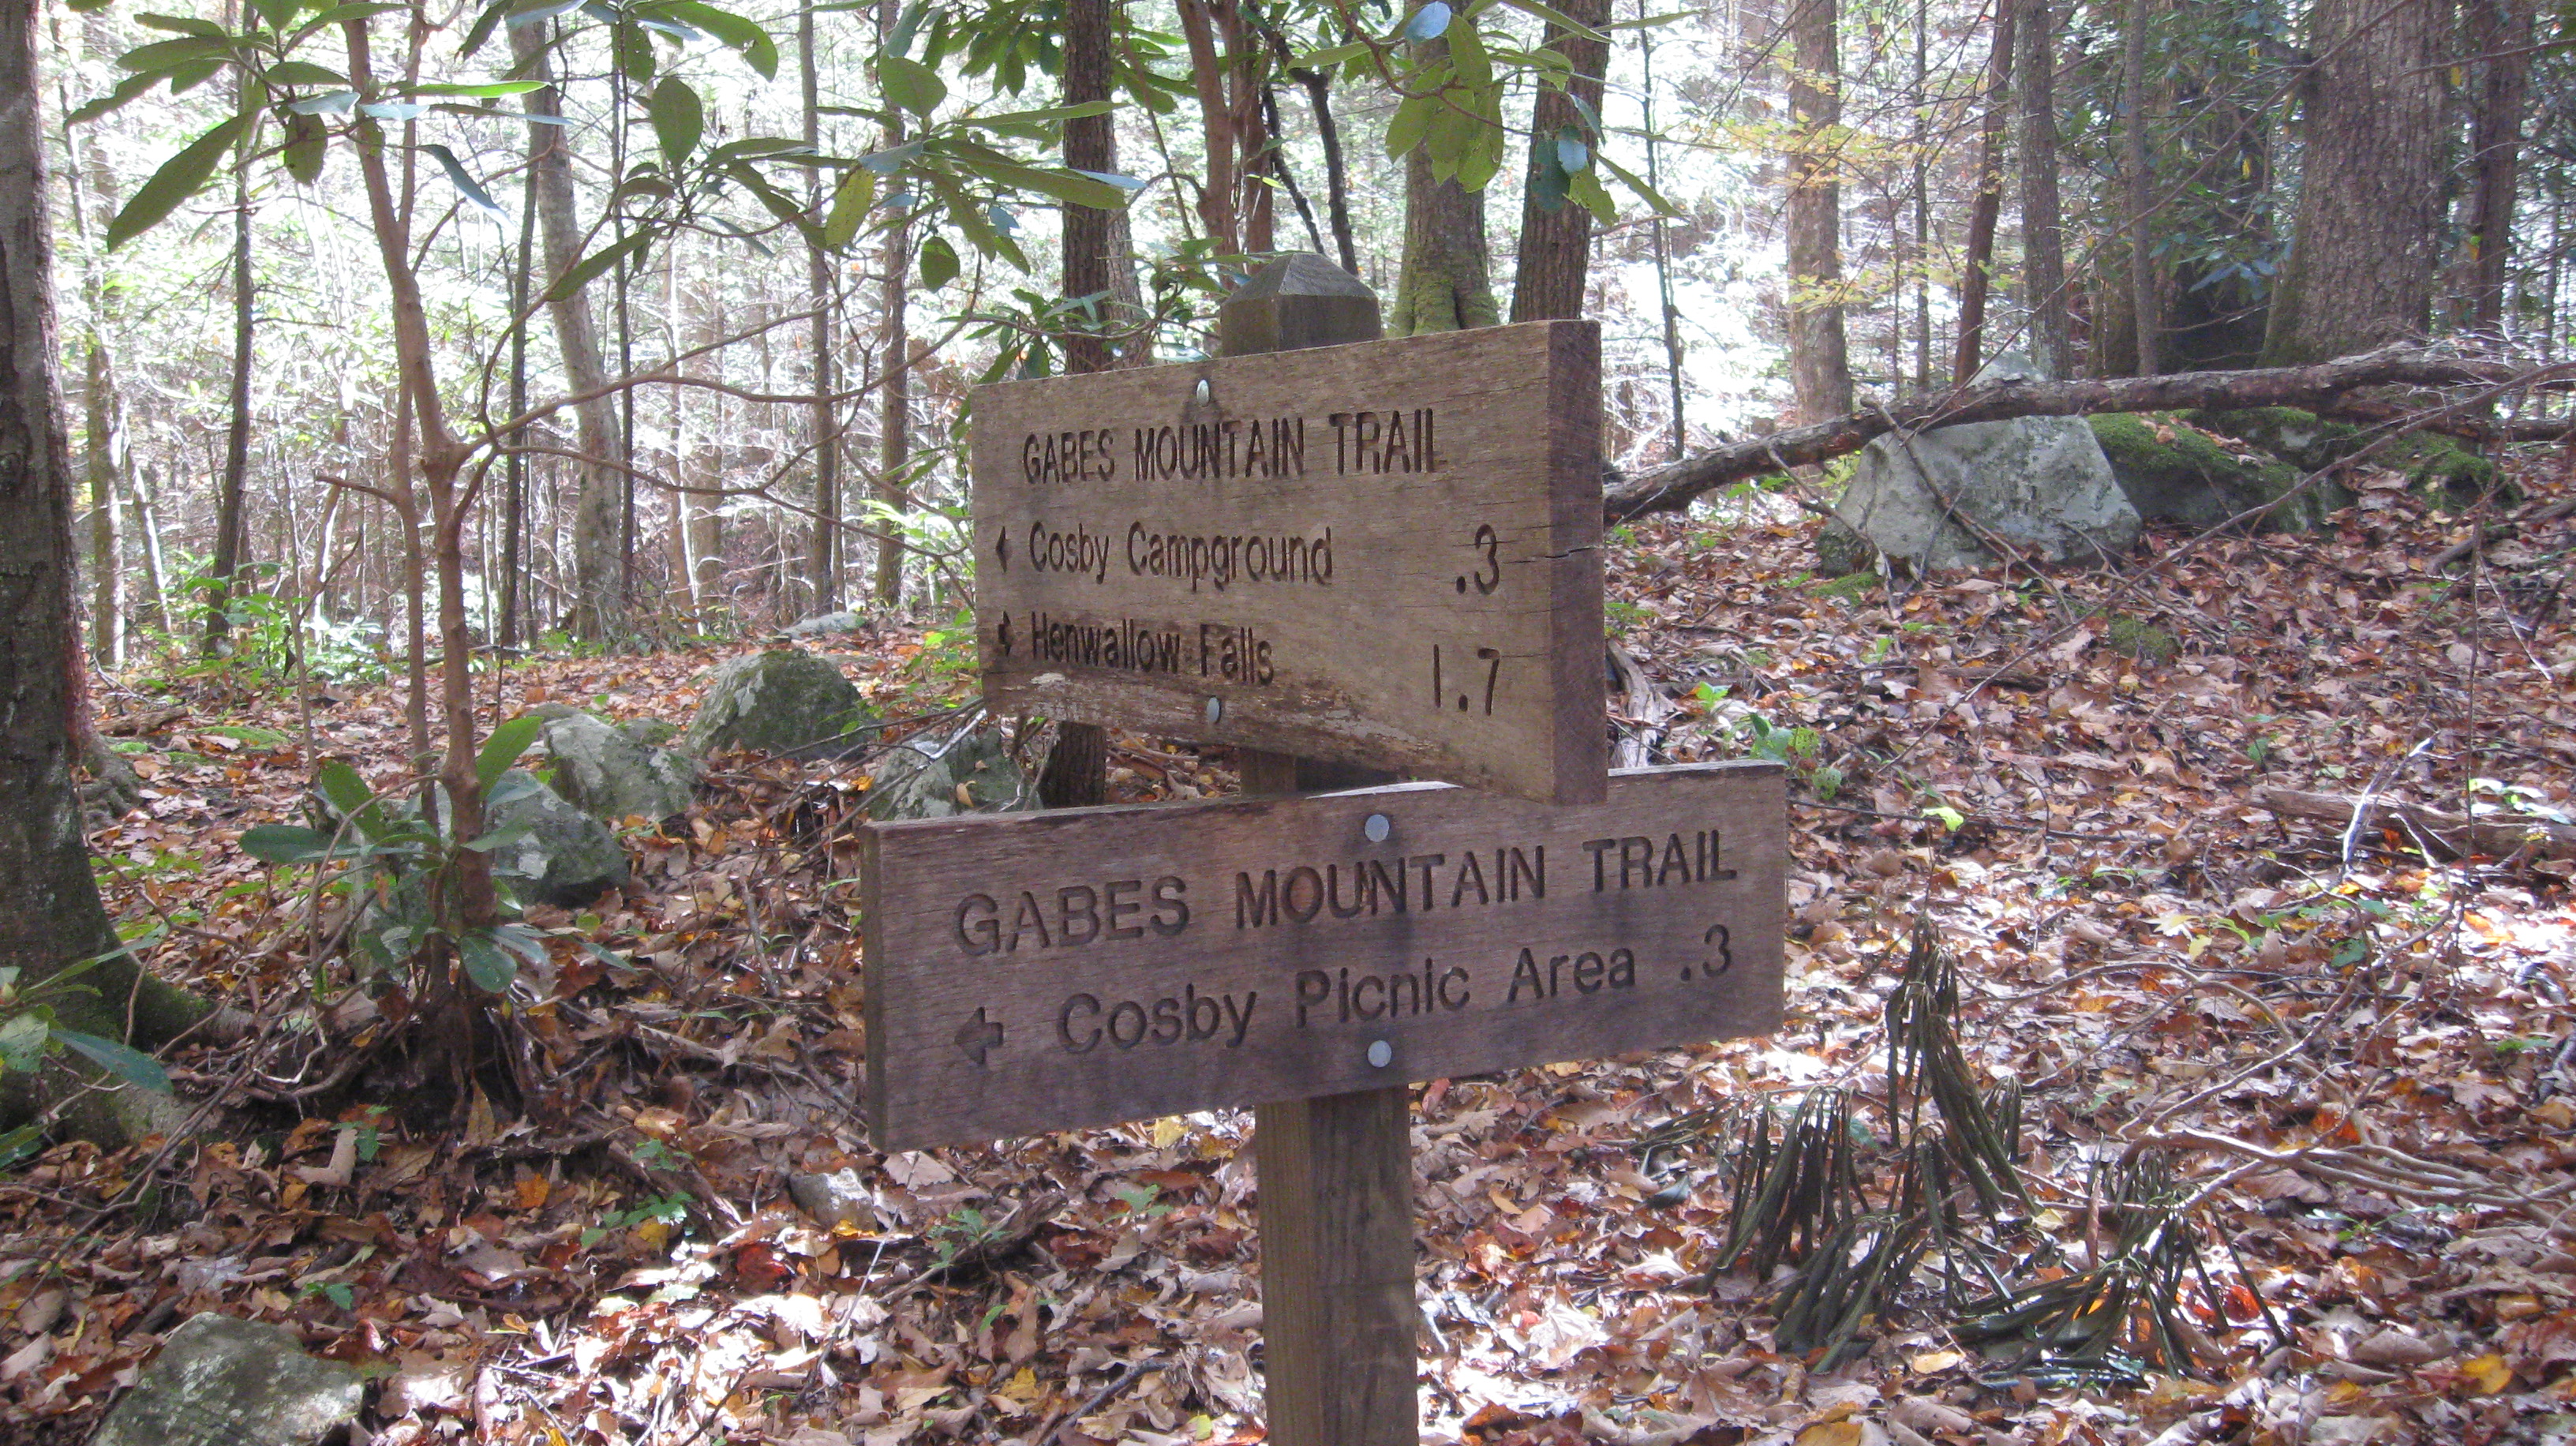 Trail sign near the trailhead where the trails from the two different trailheads join up